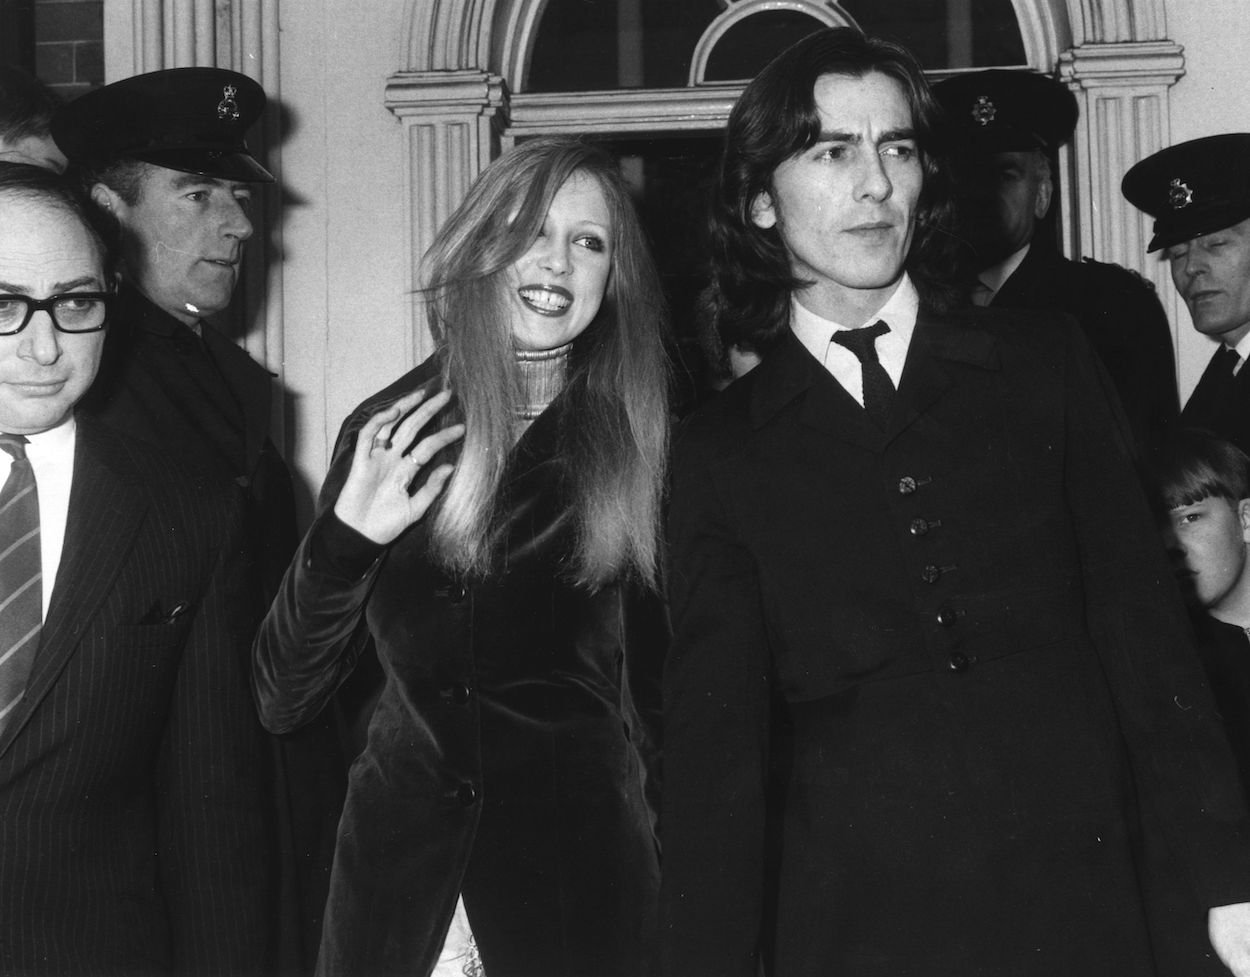 Pattie Boyd (left) and George Harrison leave court after paying a fine for cannabis possession in March 1969.